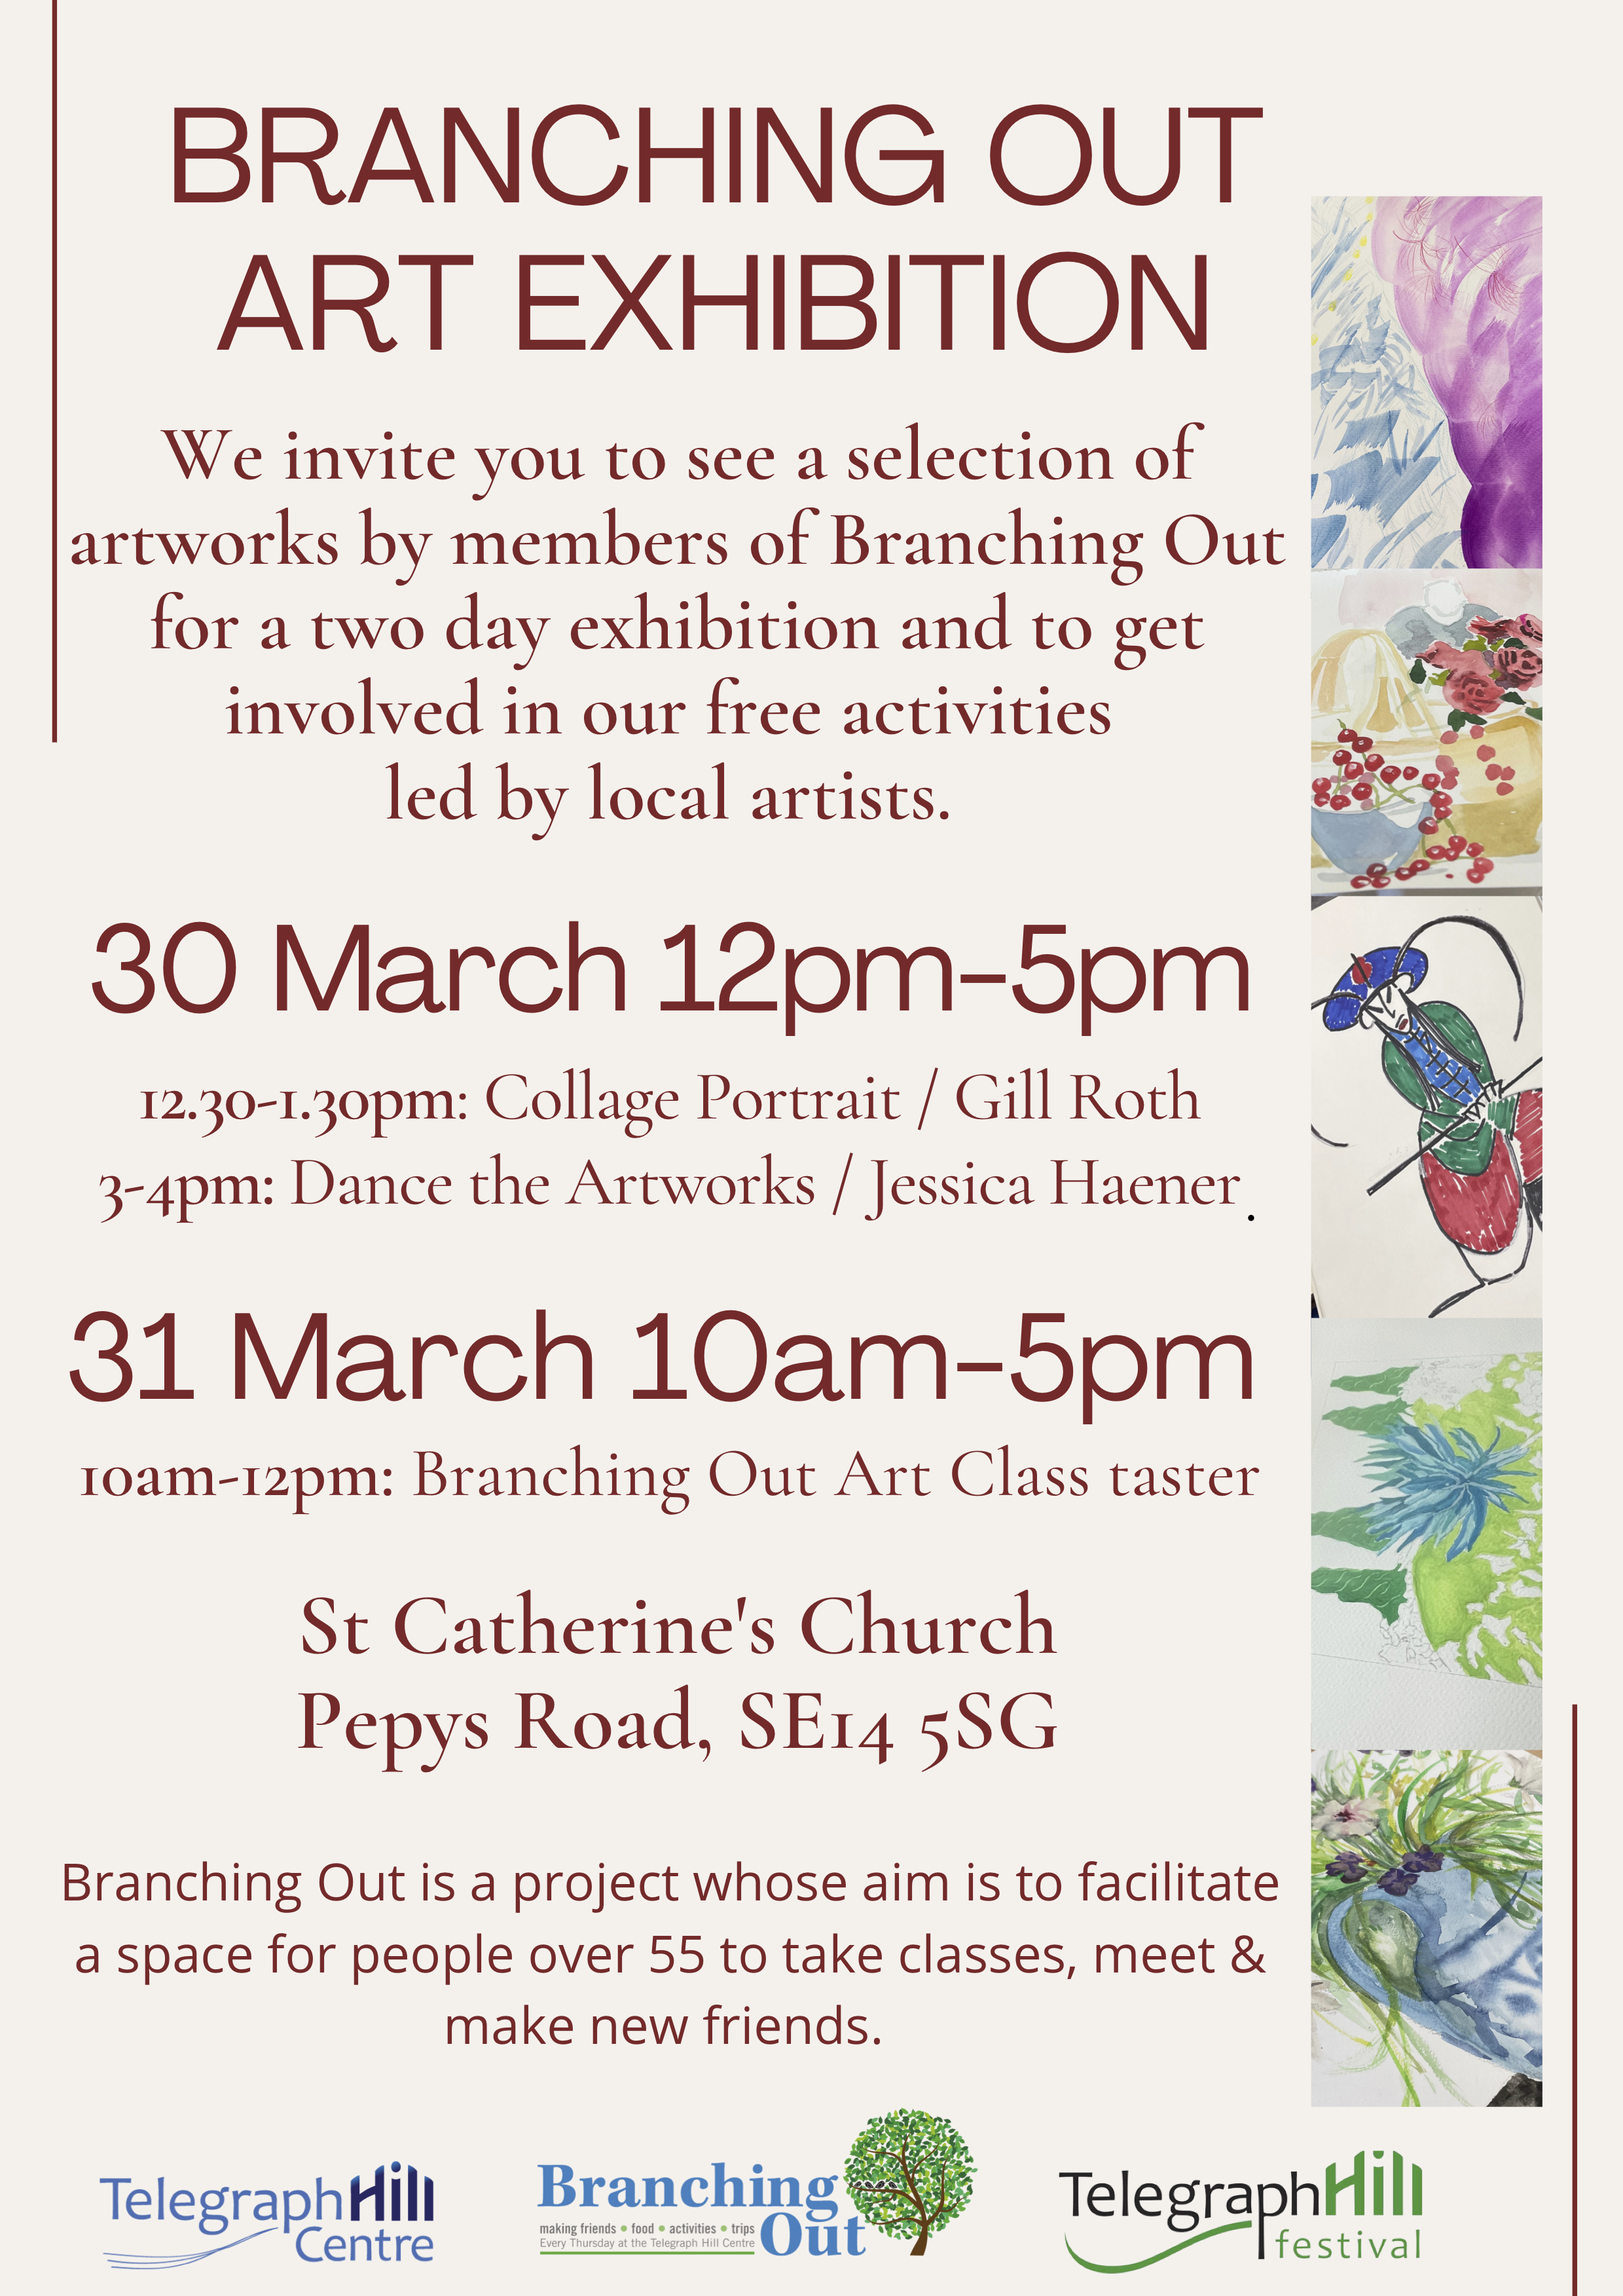 Branching Out Art Exhibition